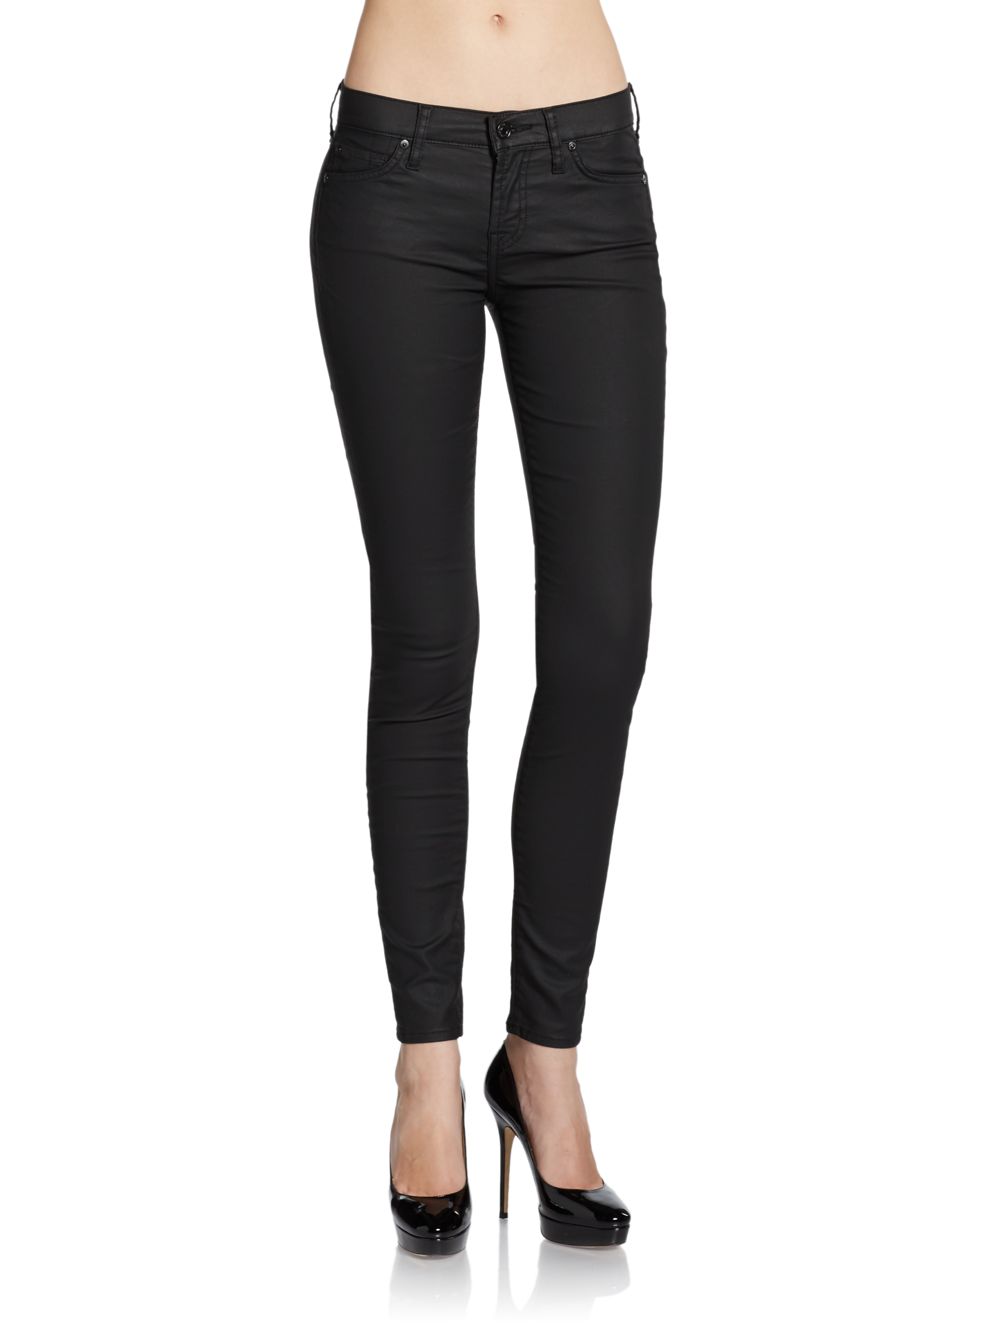 7 For All Mankind Gwenevere Coated Denim Skinny Jeans in Black - Lyst